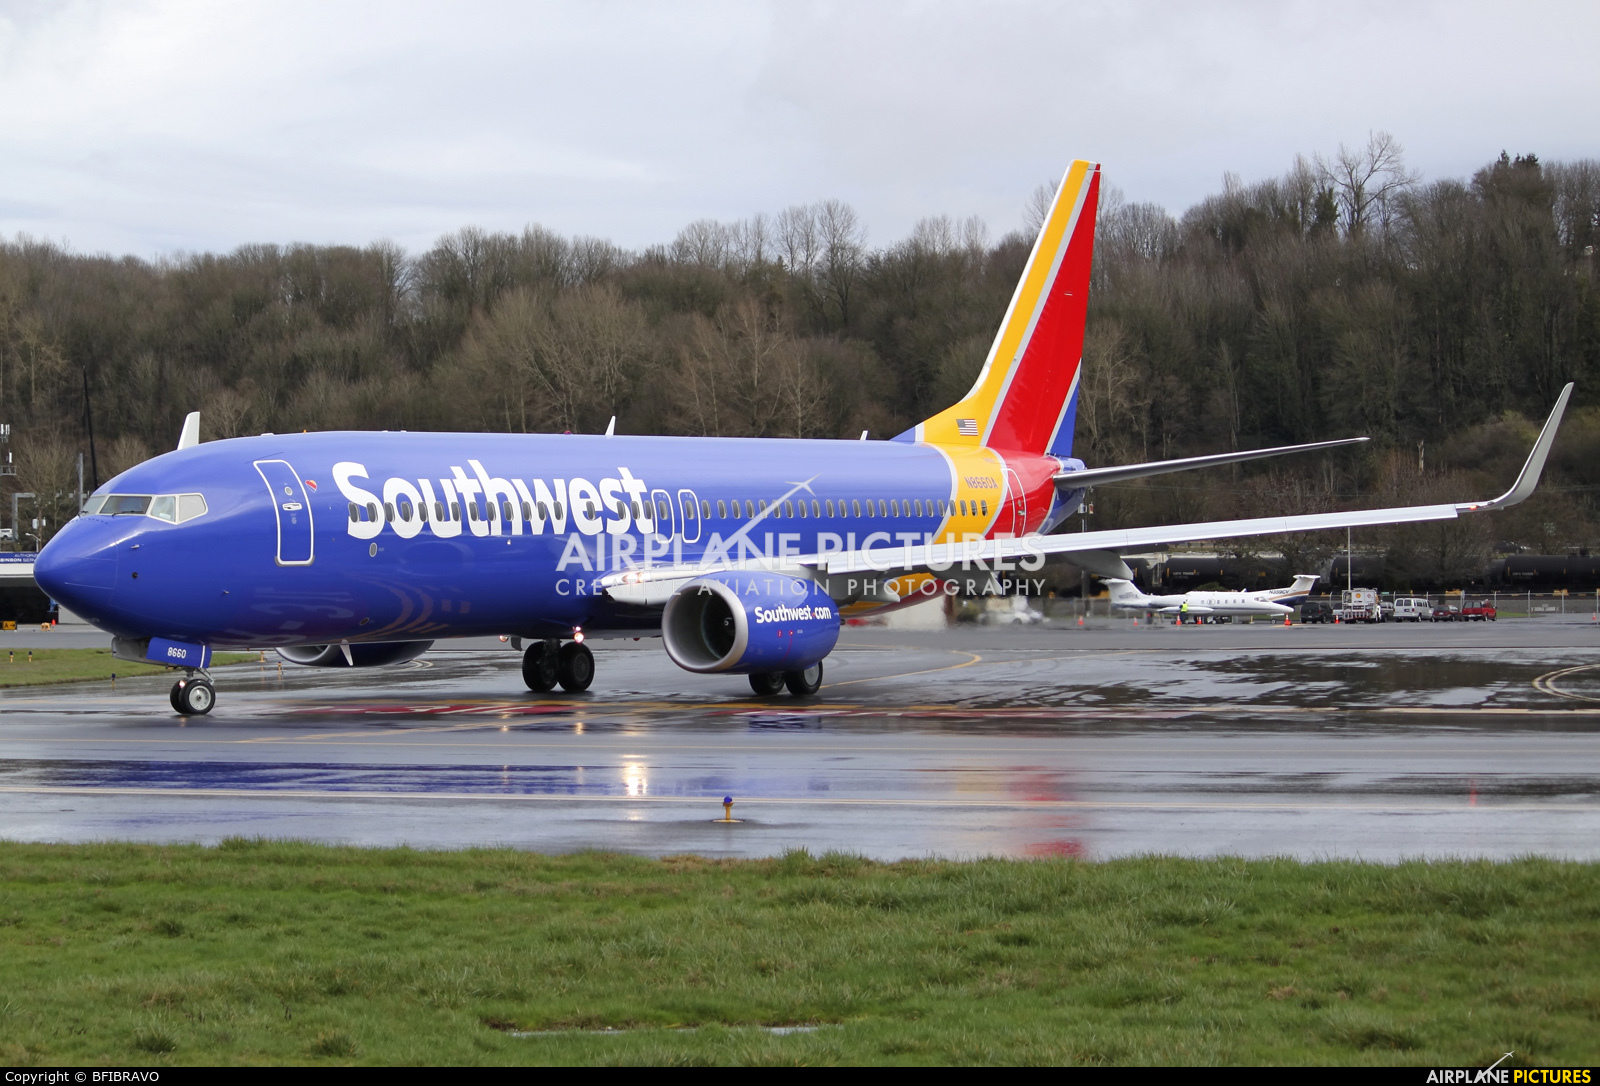 Southwest Airlines N8660A aircraft at Seattle - Boeing Field / King County Intl